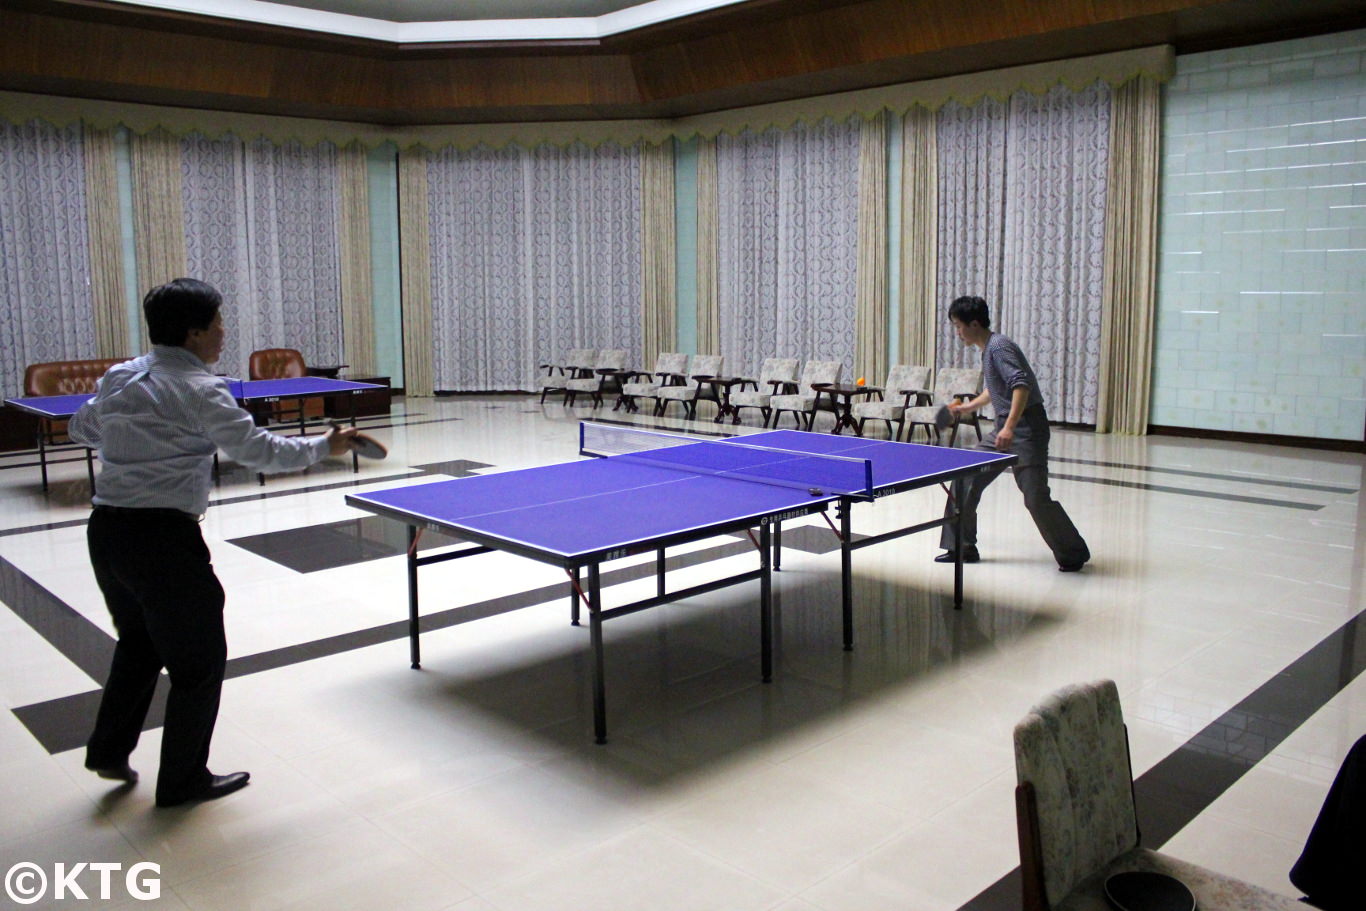 North Korean men playing table tennis at the Ryonggang Hot Spa Hotel near Nampo city in North Korea, DPRK. Picture taken by KTG Travel